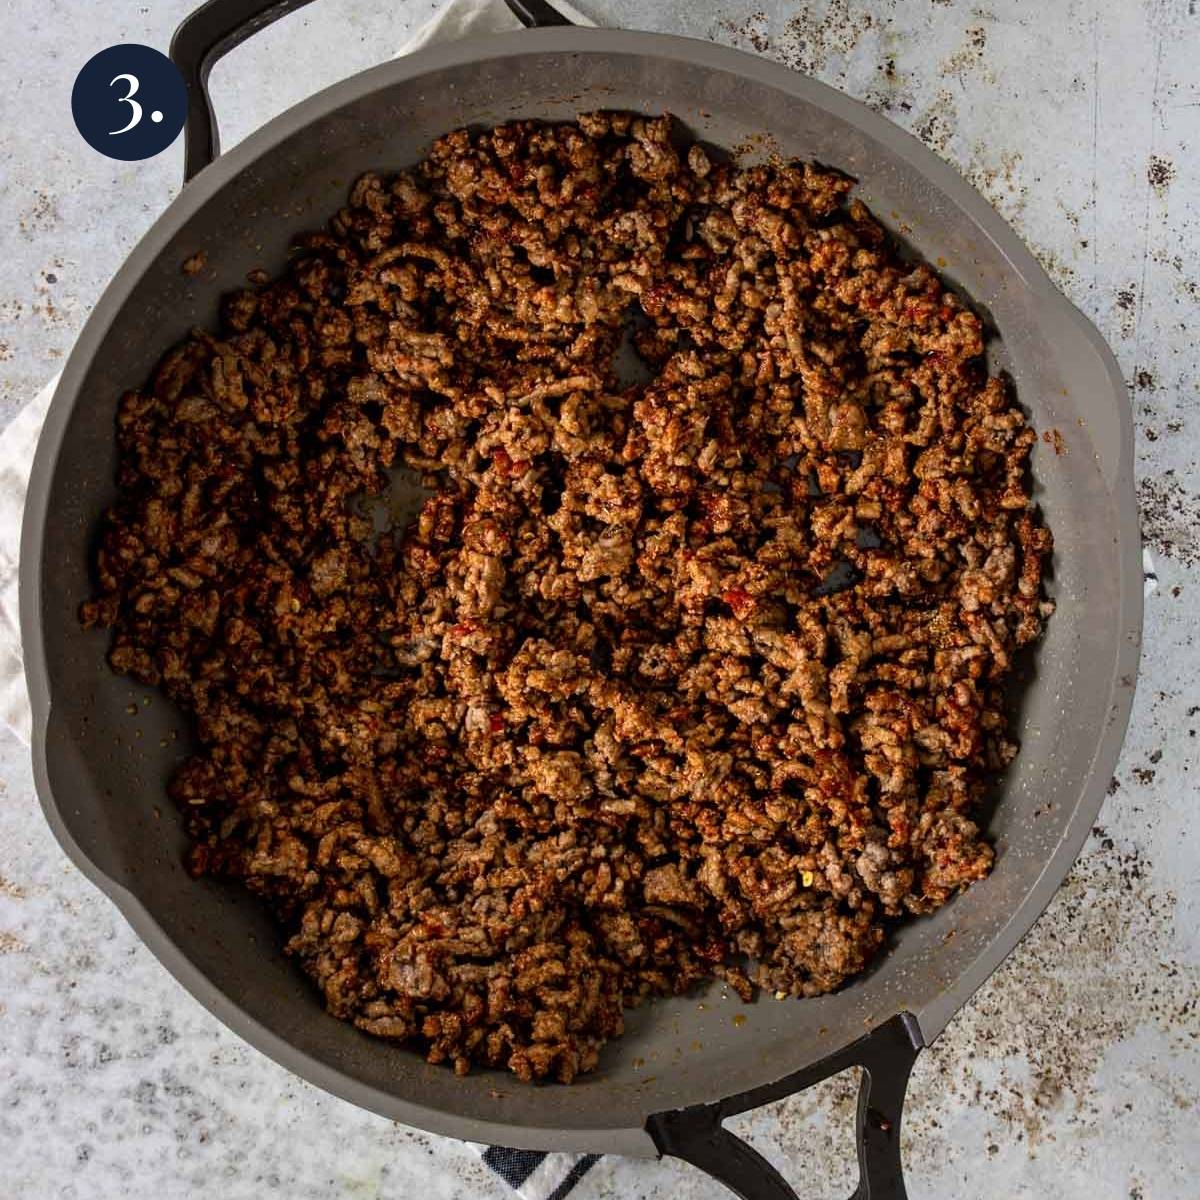 spices added to cooked ground beef